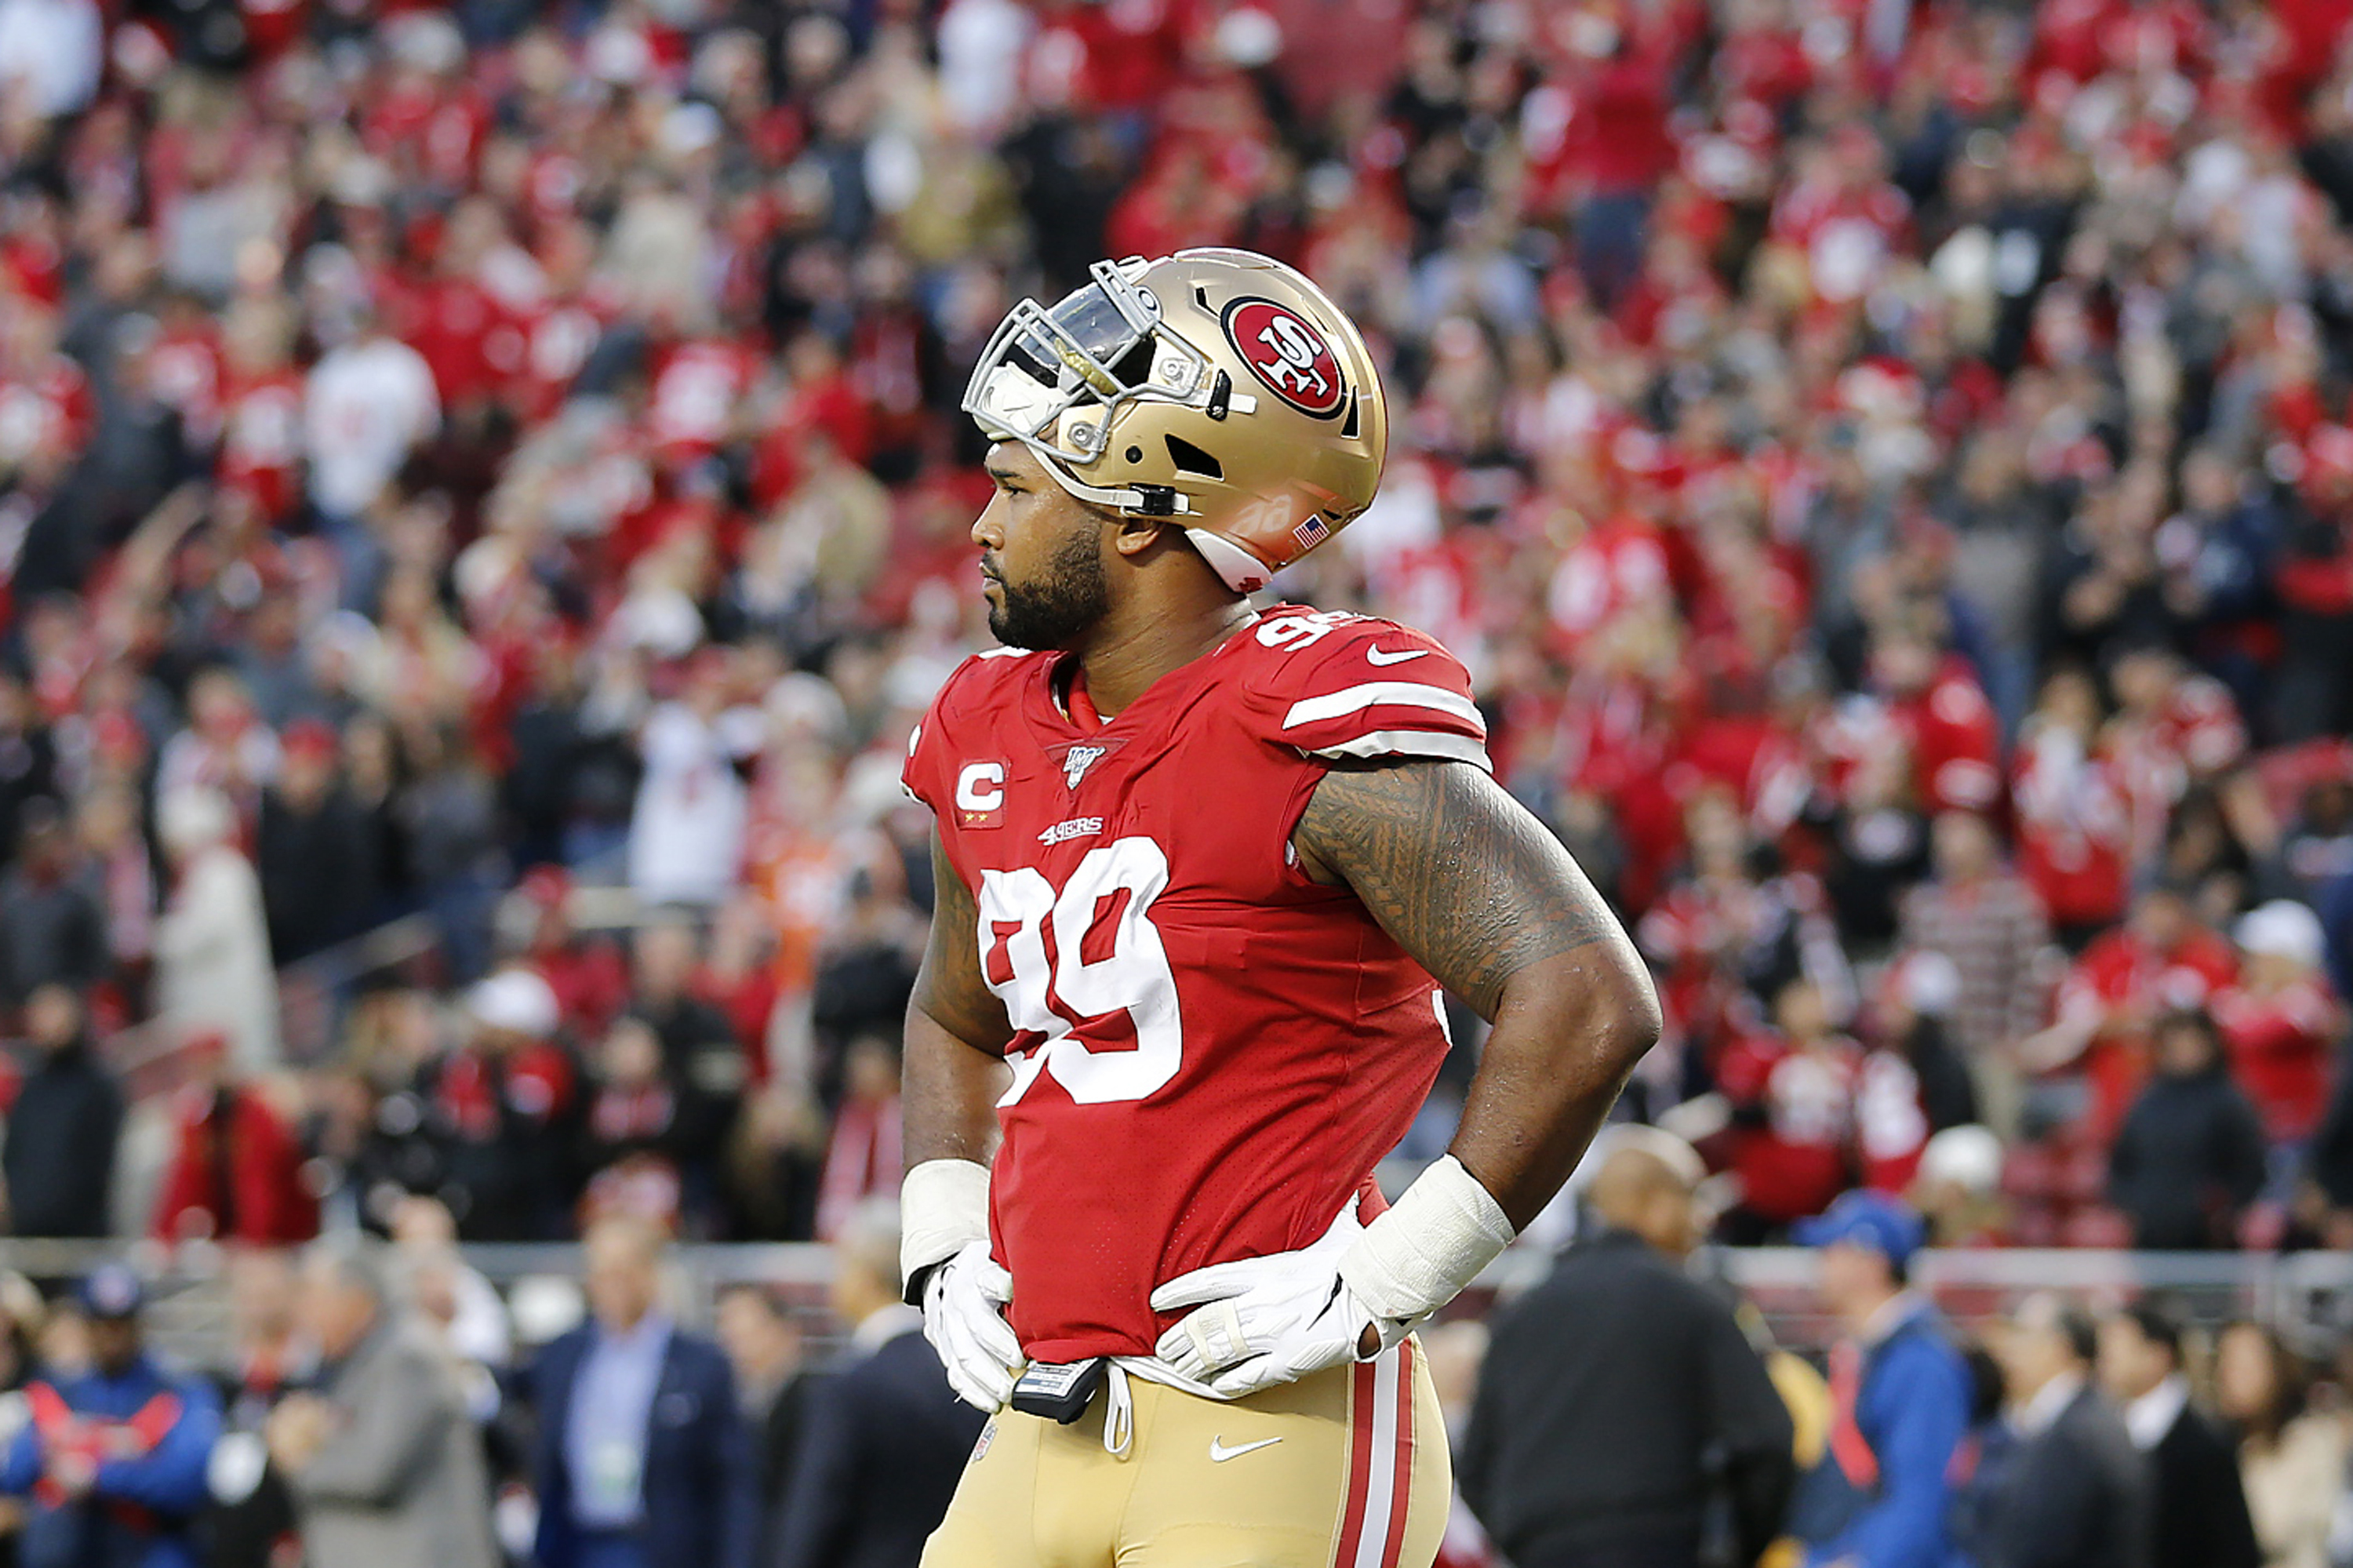 49ers remain in control for top seed despite loss to Falcons